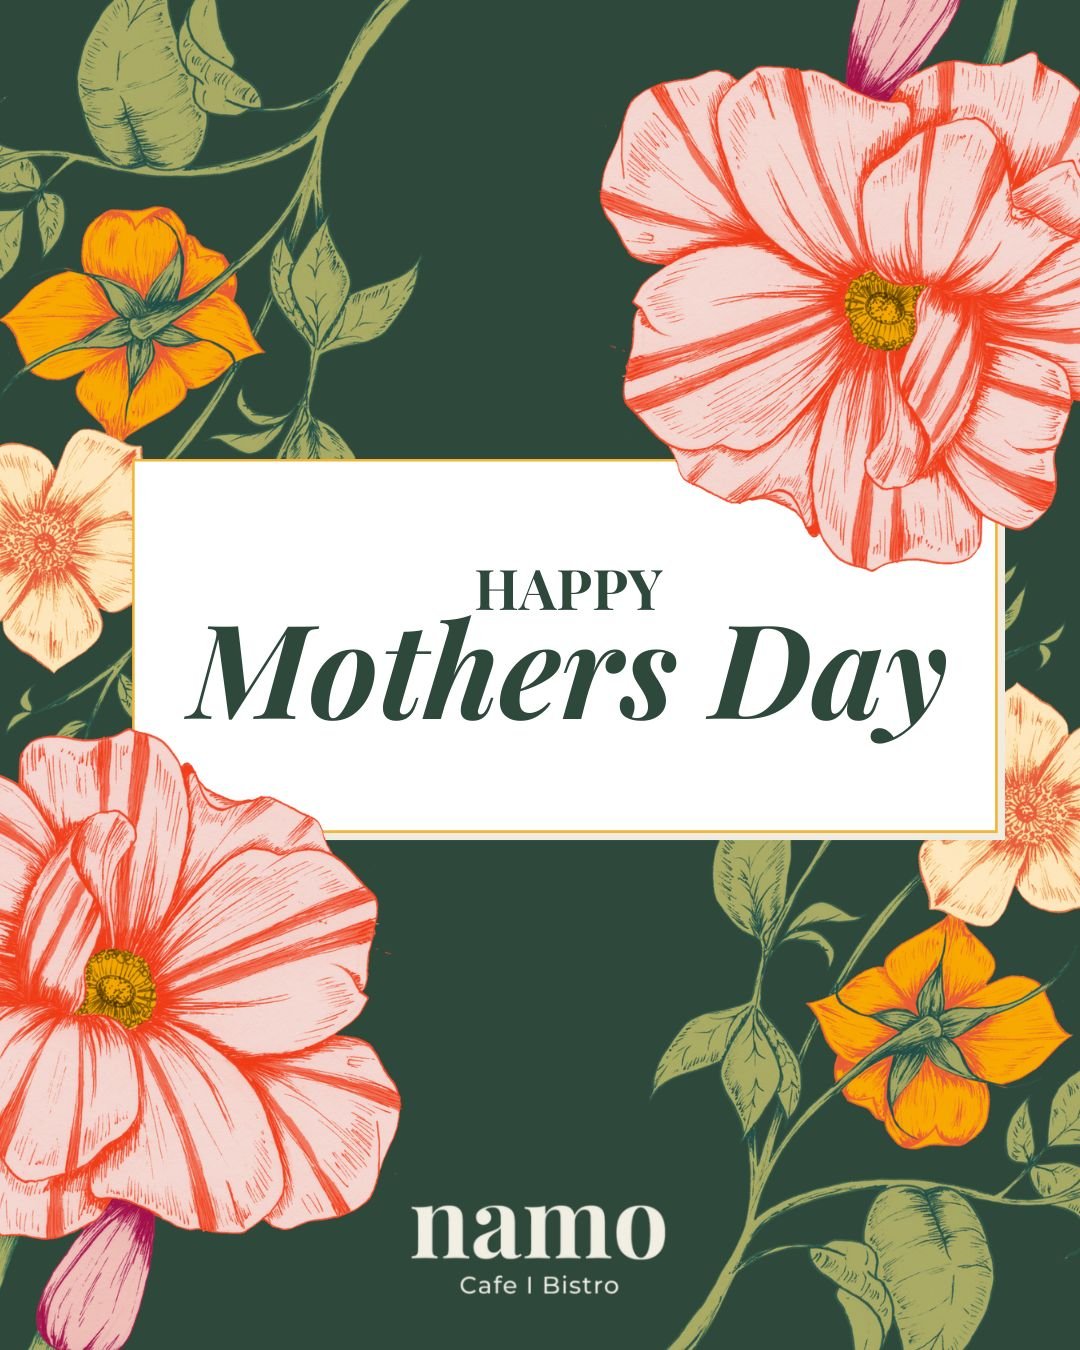 Happy Mother's Day to all the amazing moms out there! From our team to yours, we're sending love, gratitude, and hugs your way 💐❤️

Chef-driven family owned and operated 🍳
📍Edmonton Trail
📍Beltline

#namocafebistro #CalgaryBrunch #YYCBrunch #Calg